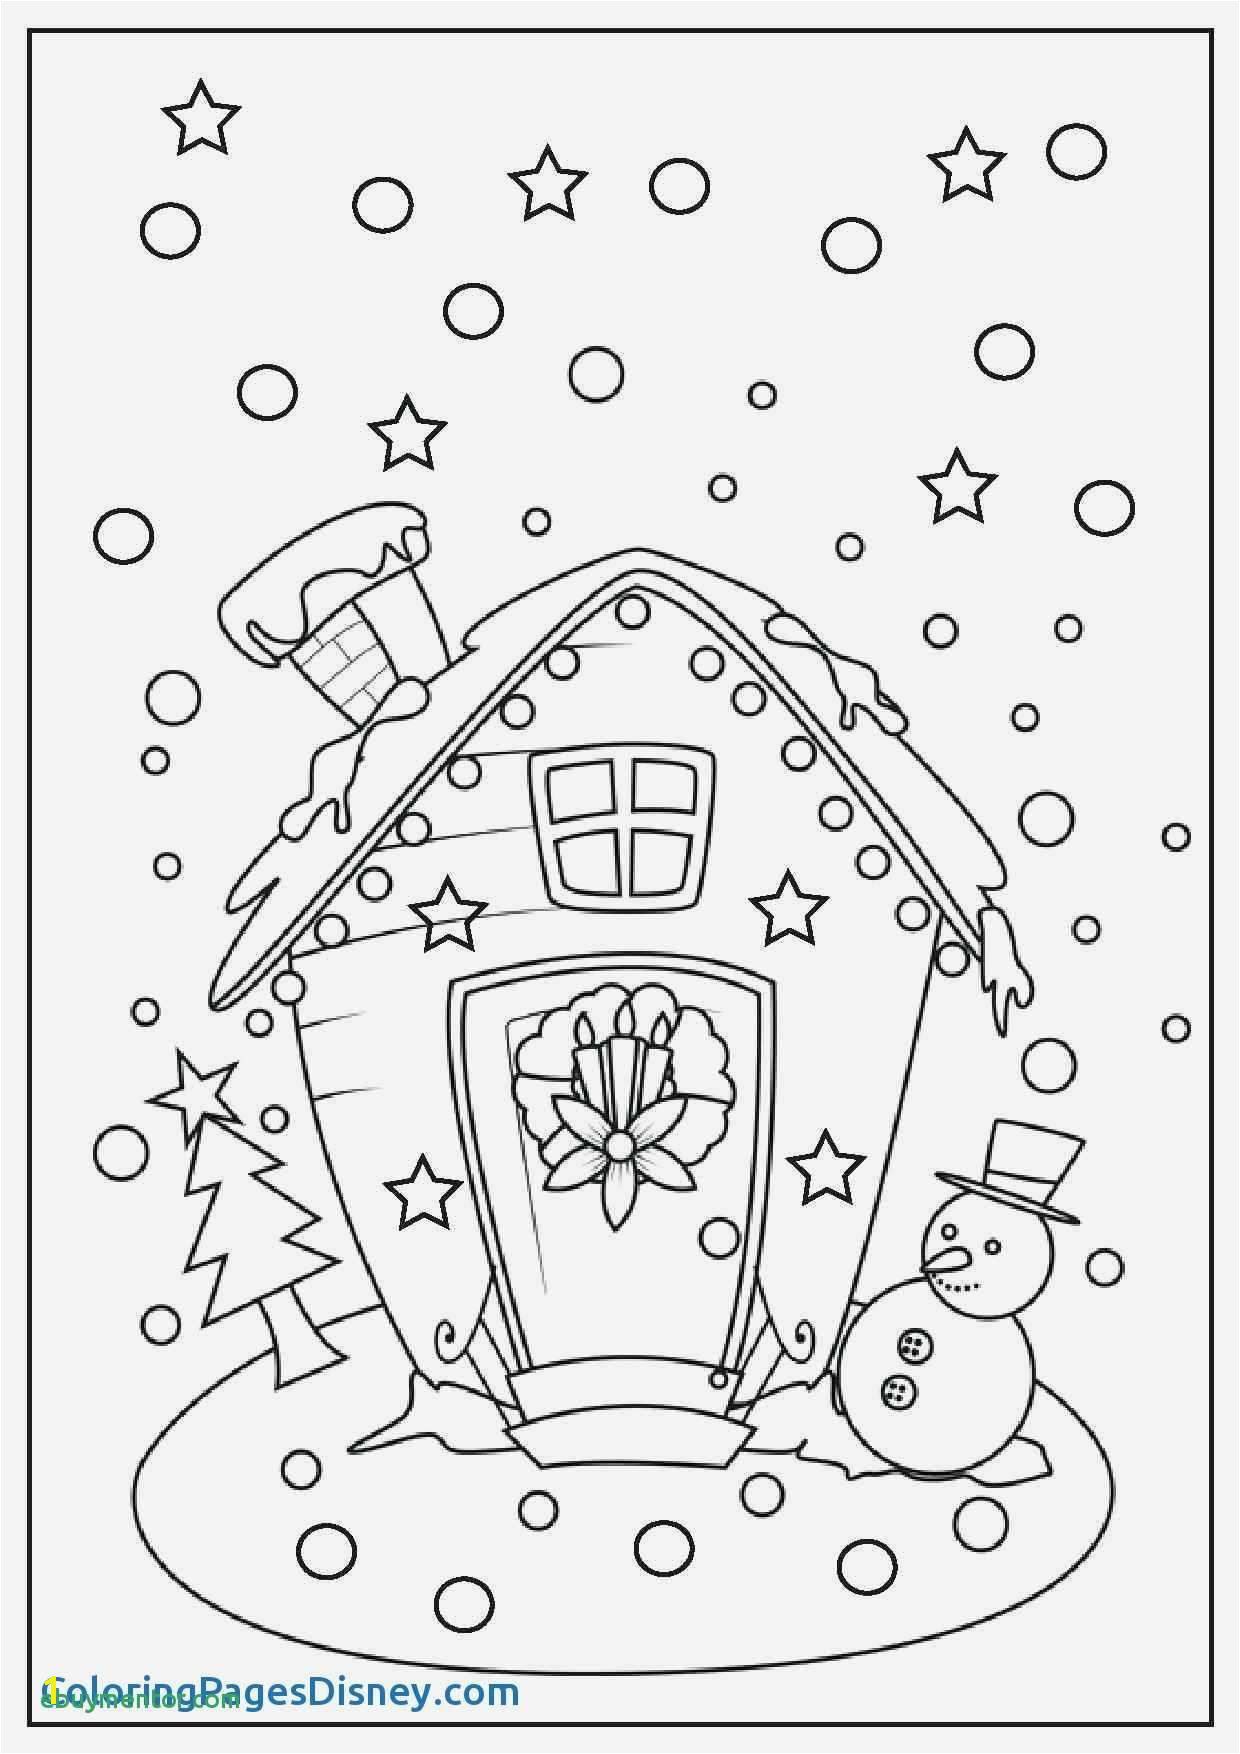 Coloring Pages for Christmas Free Printable 28 Christmas Coloring Pages Free Printable